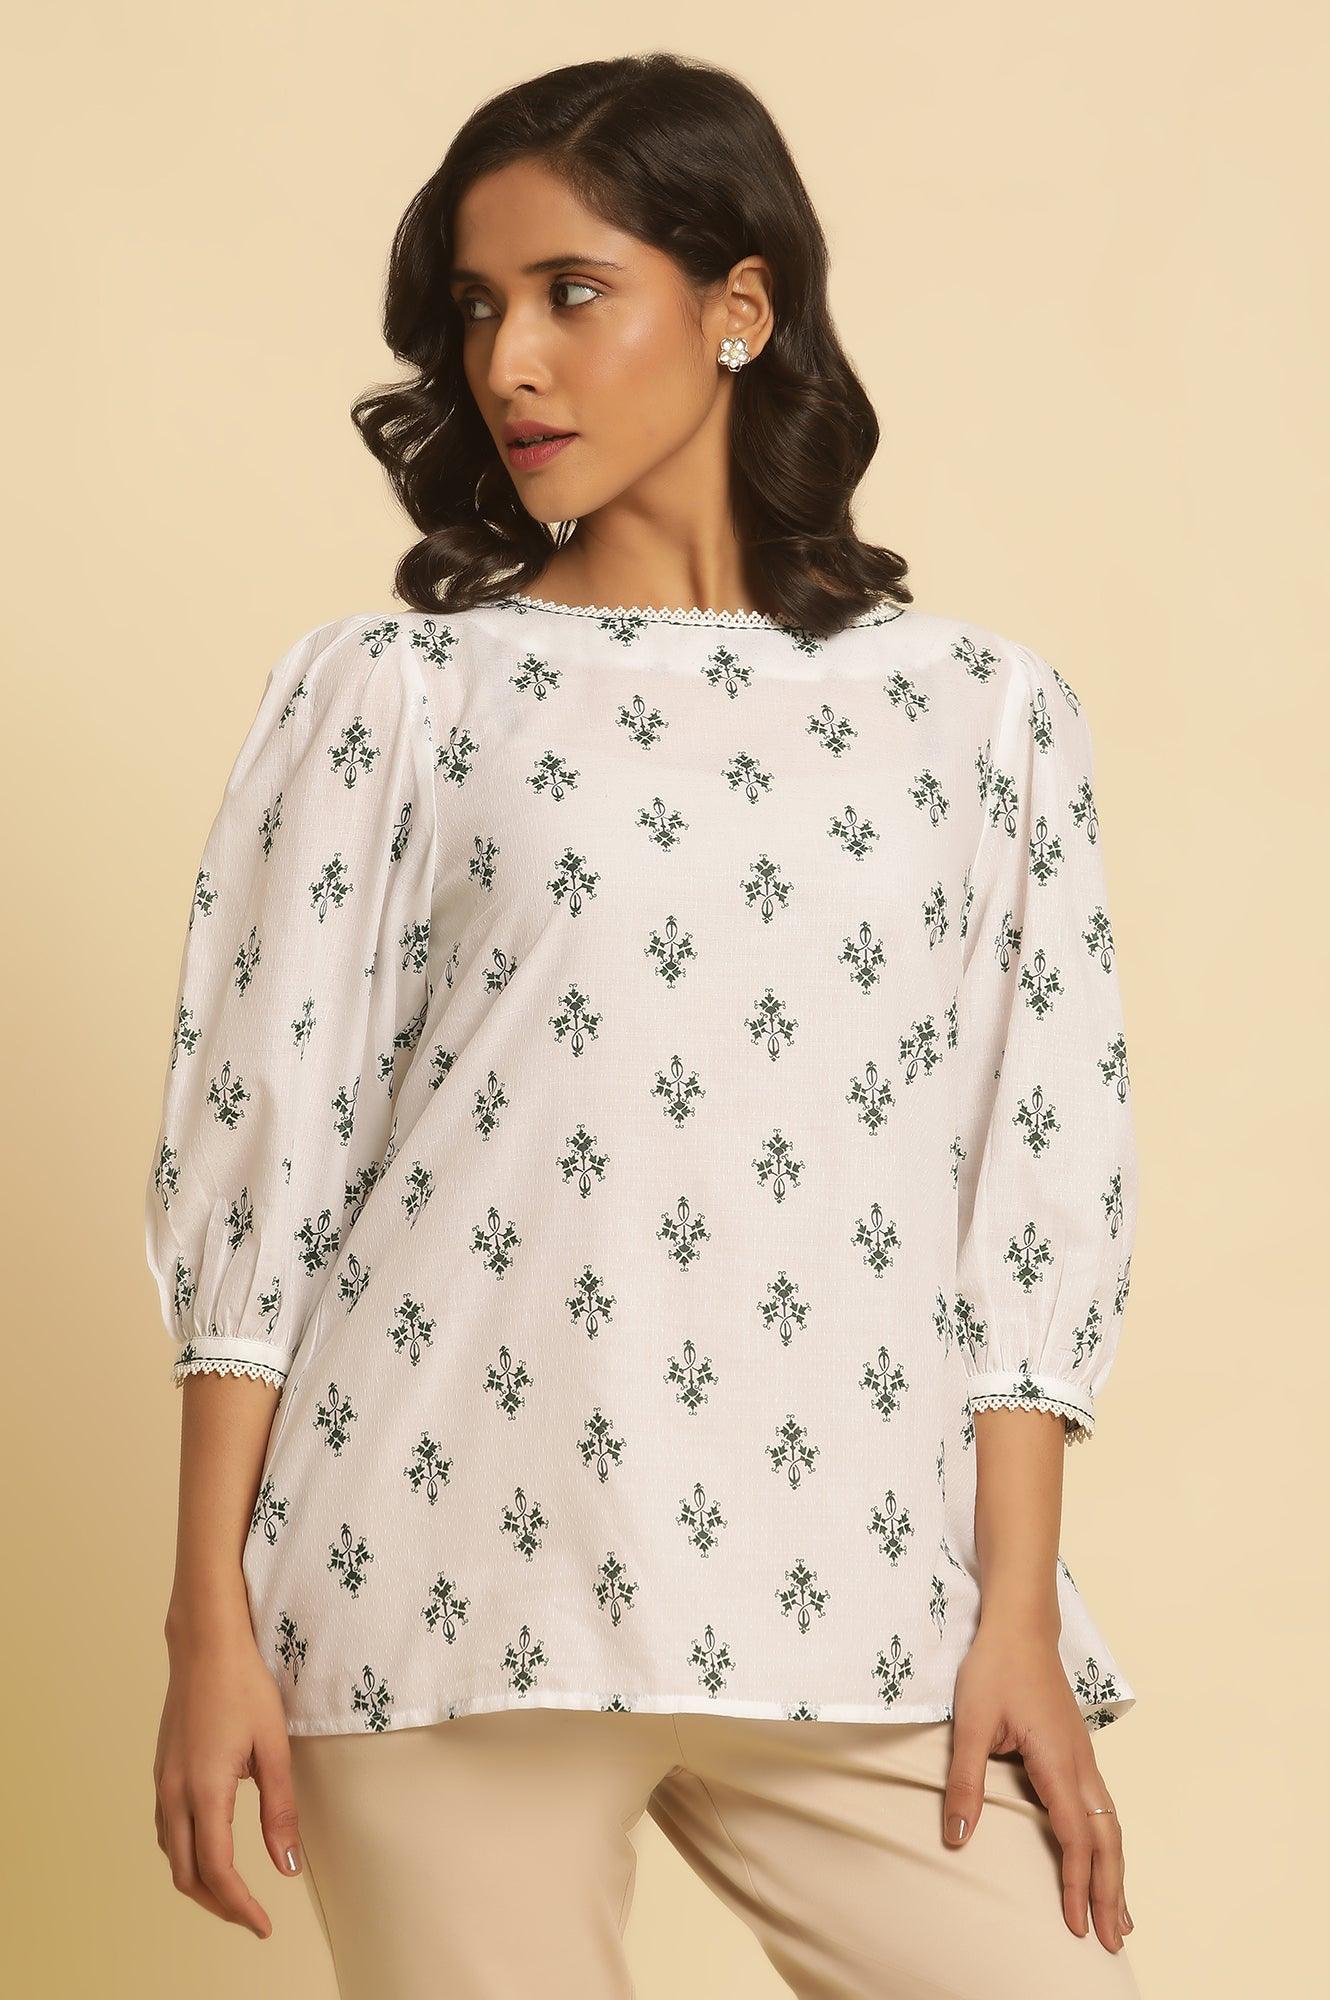 White Printed Top Wit Lace And Puffed Sleeves - wforwoman